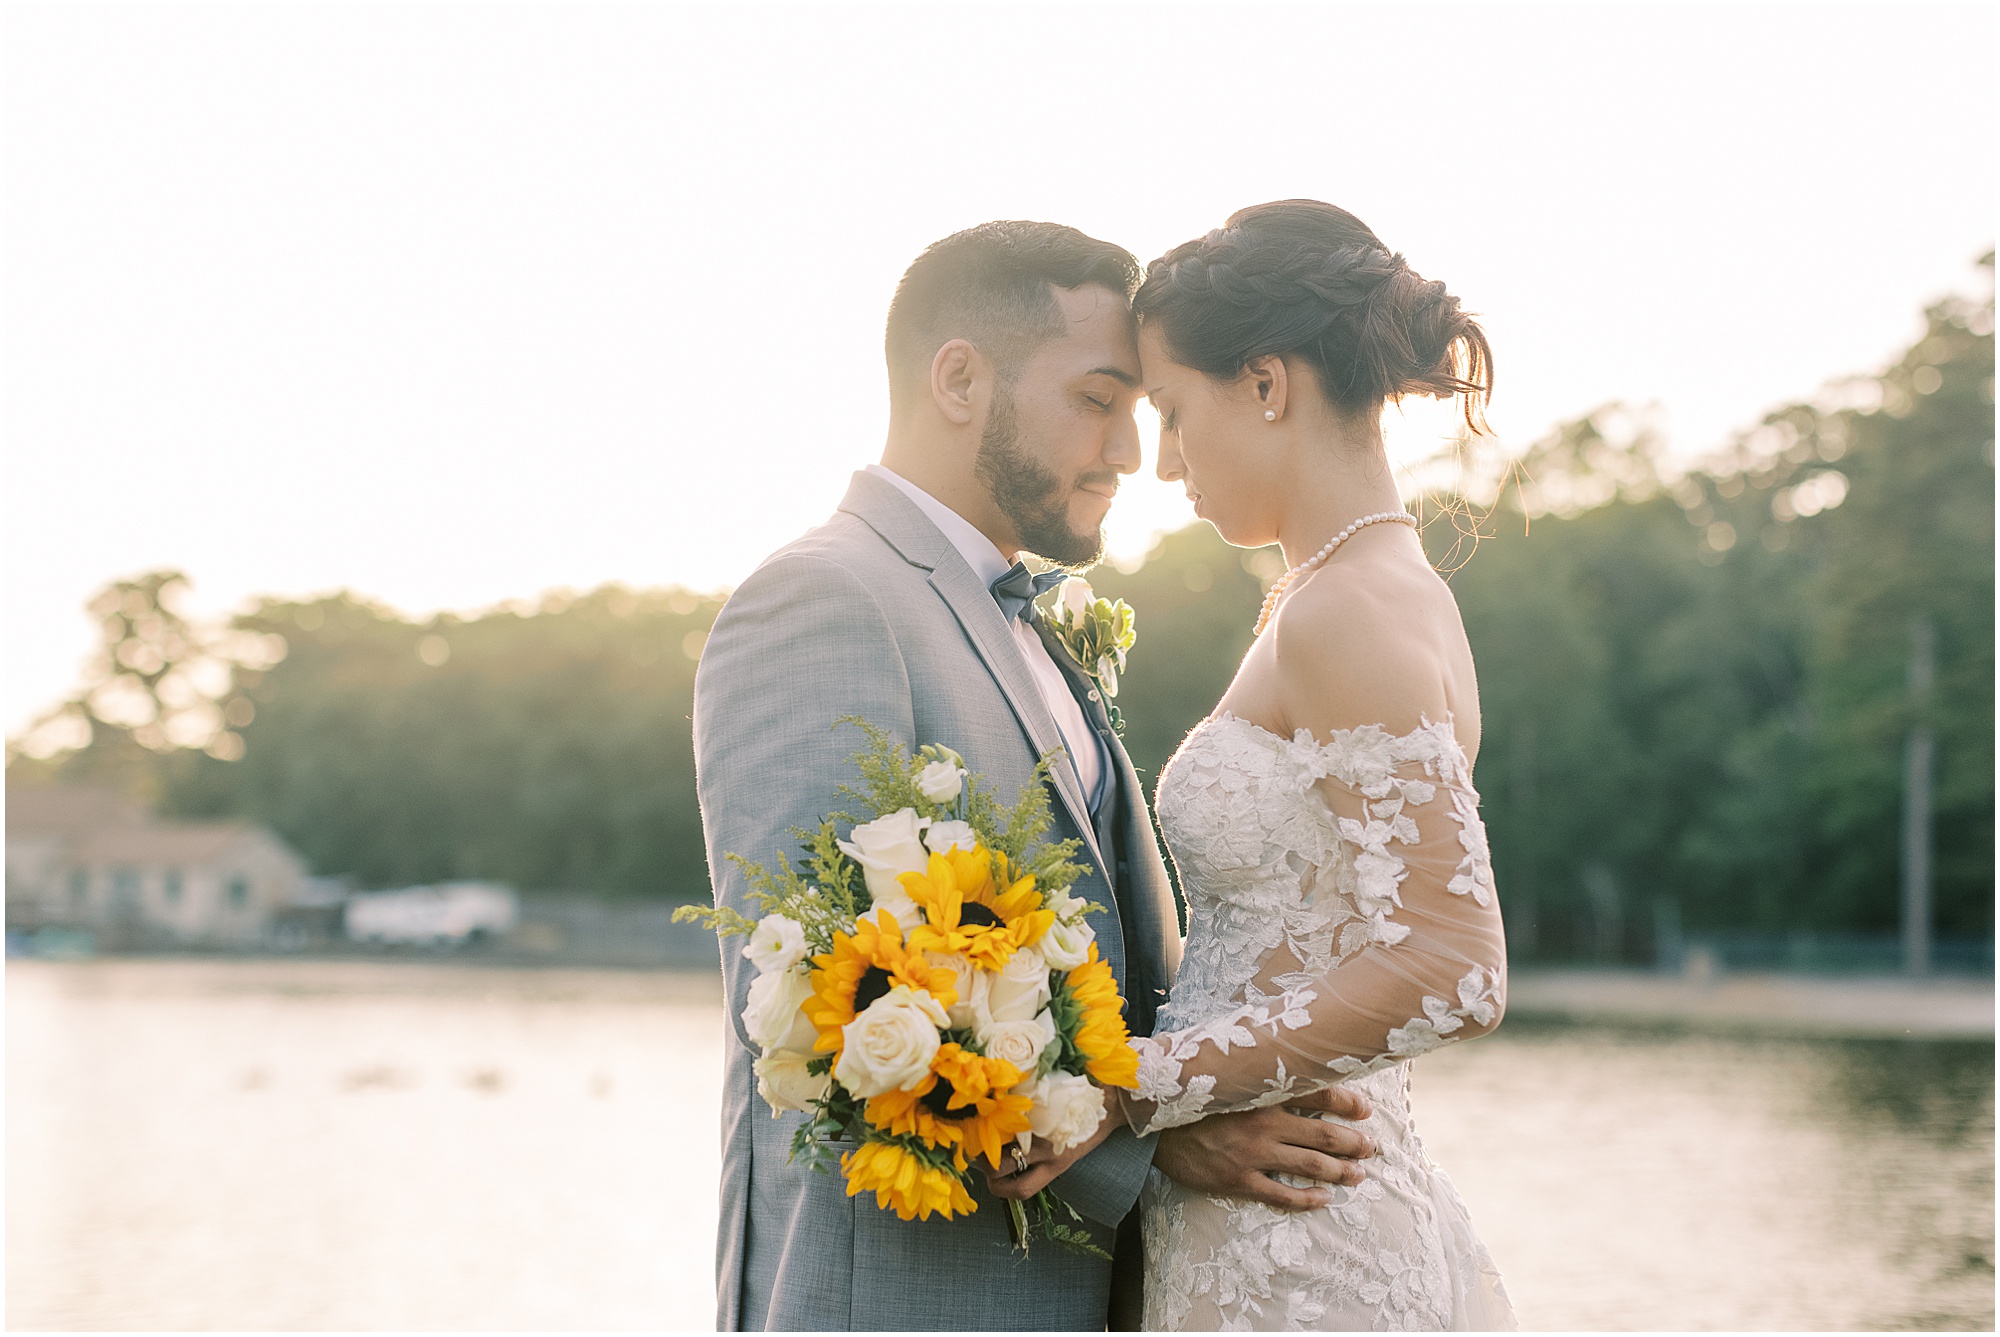 Bride and groom Portraits at Sunset